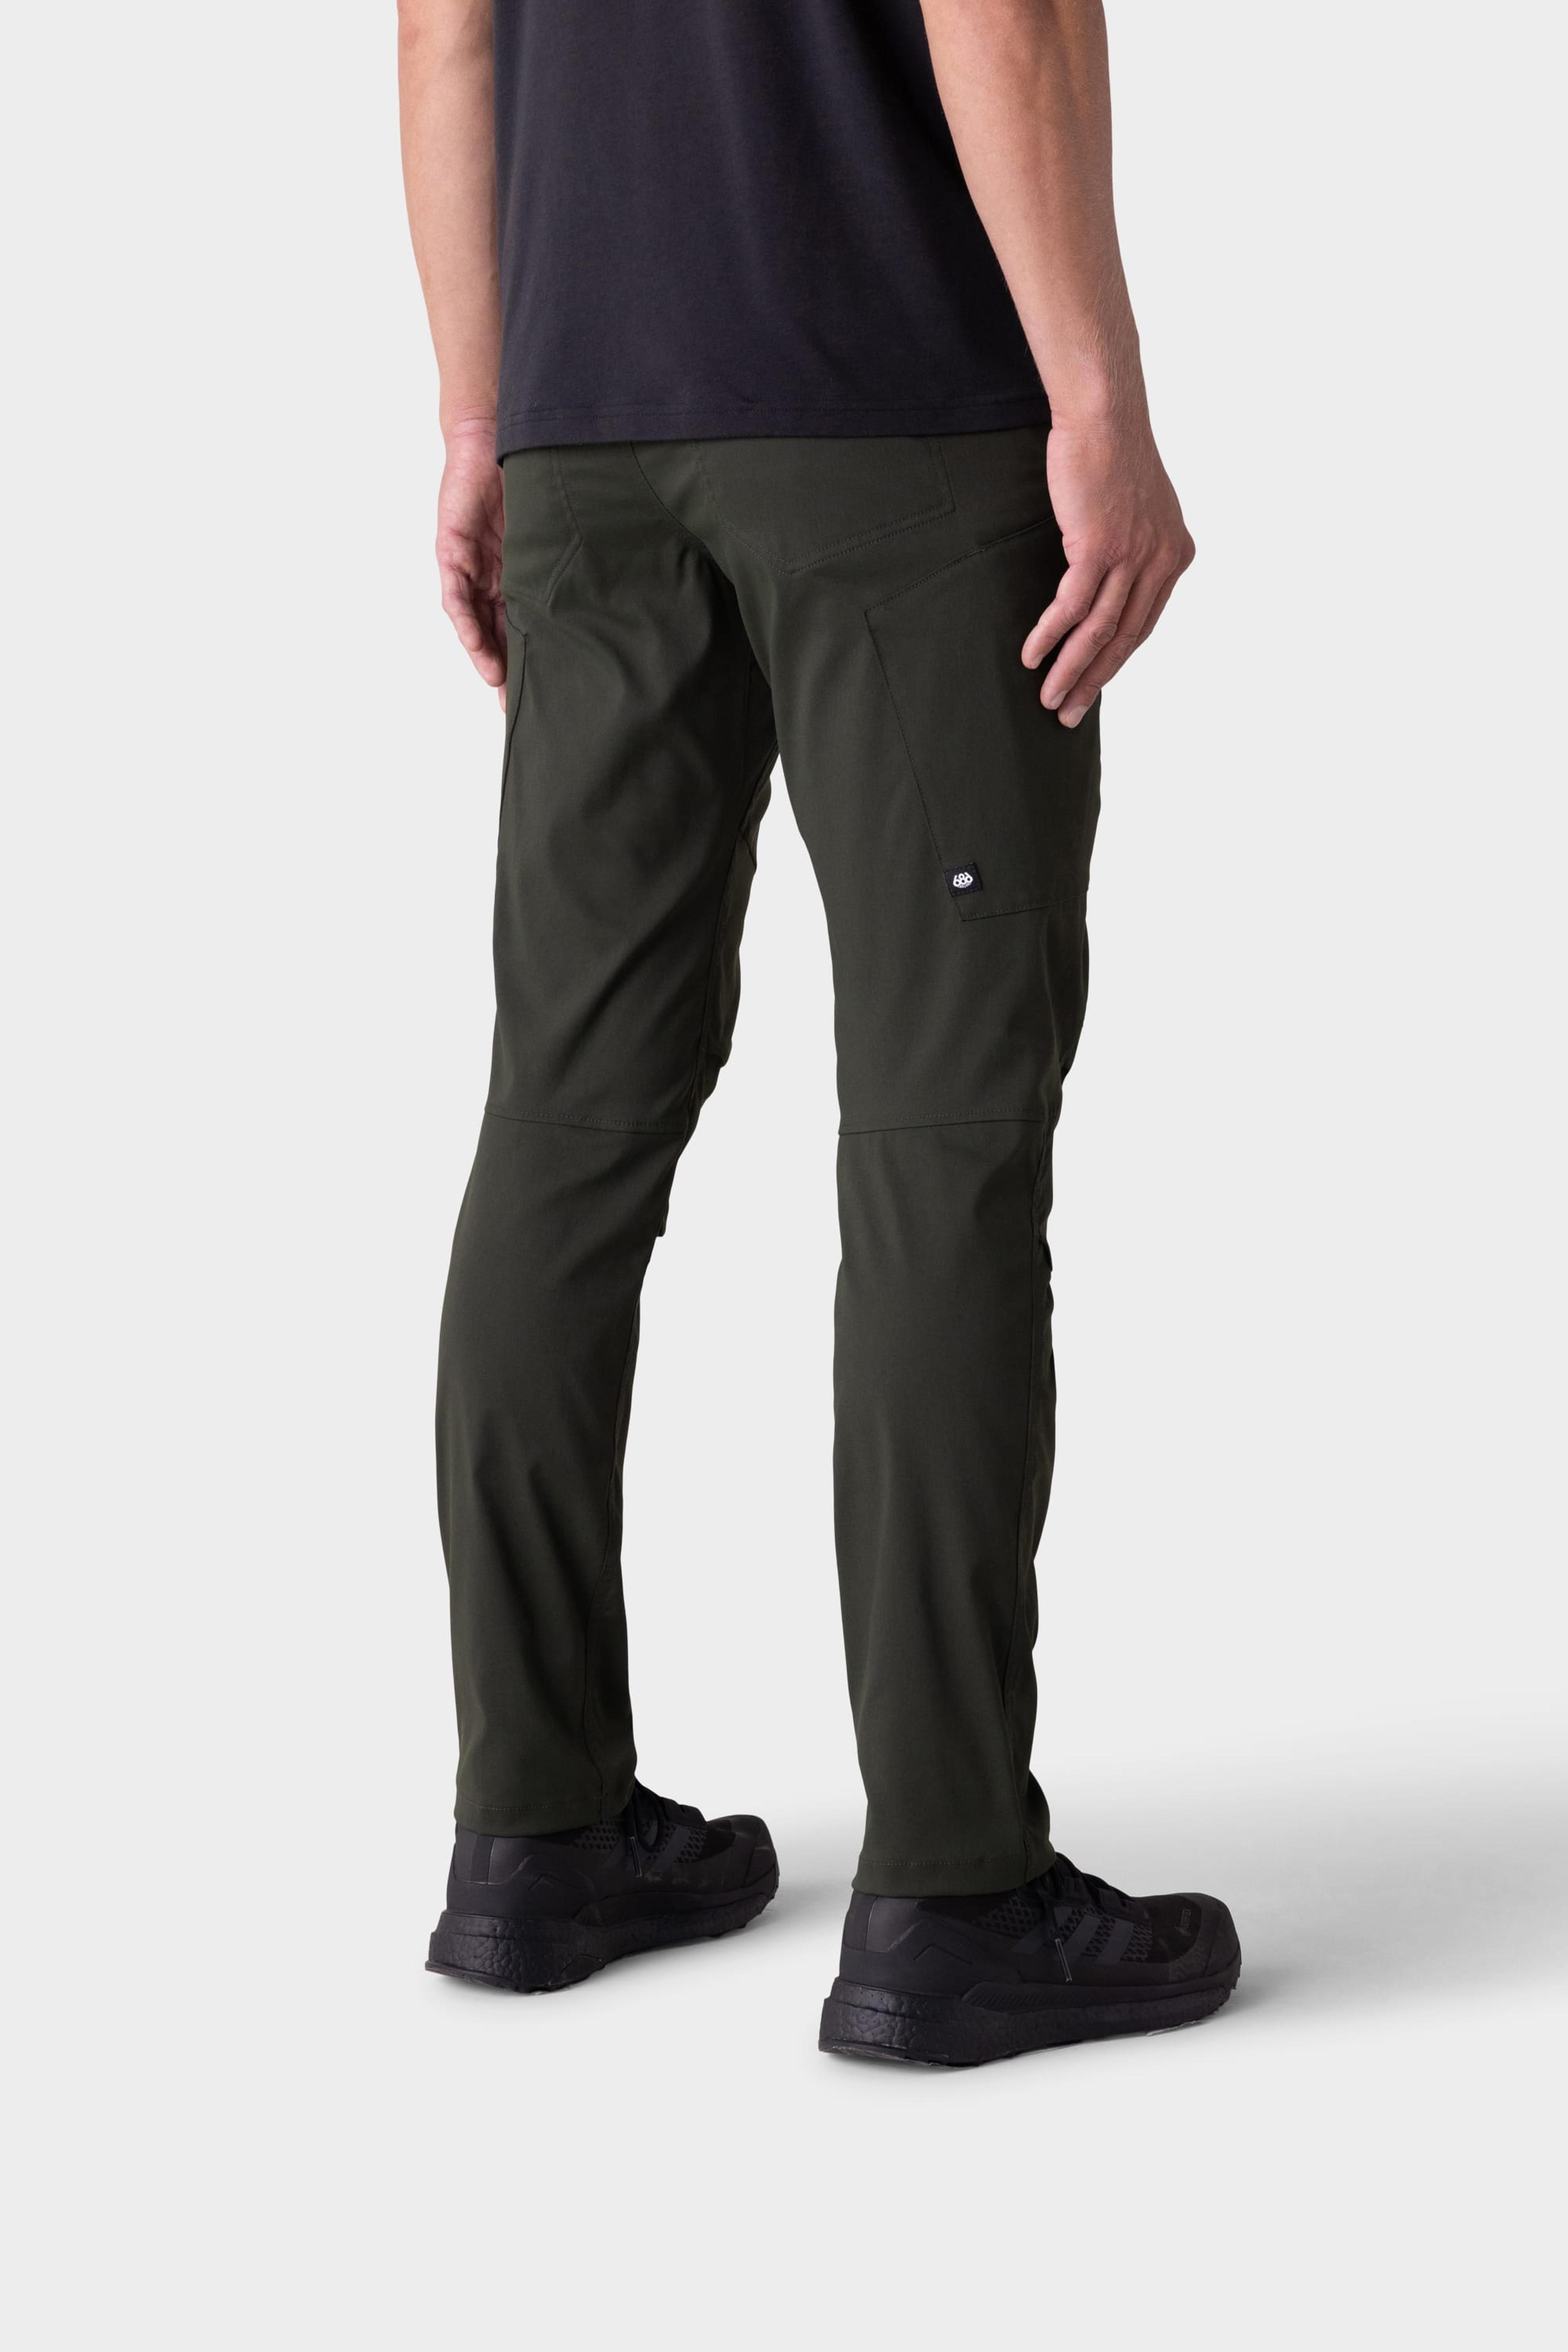 Alternate View 58 of 686 Men's Anything Cargo Pant - Slim Fit